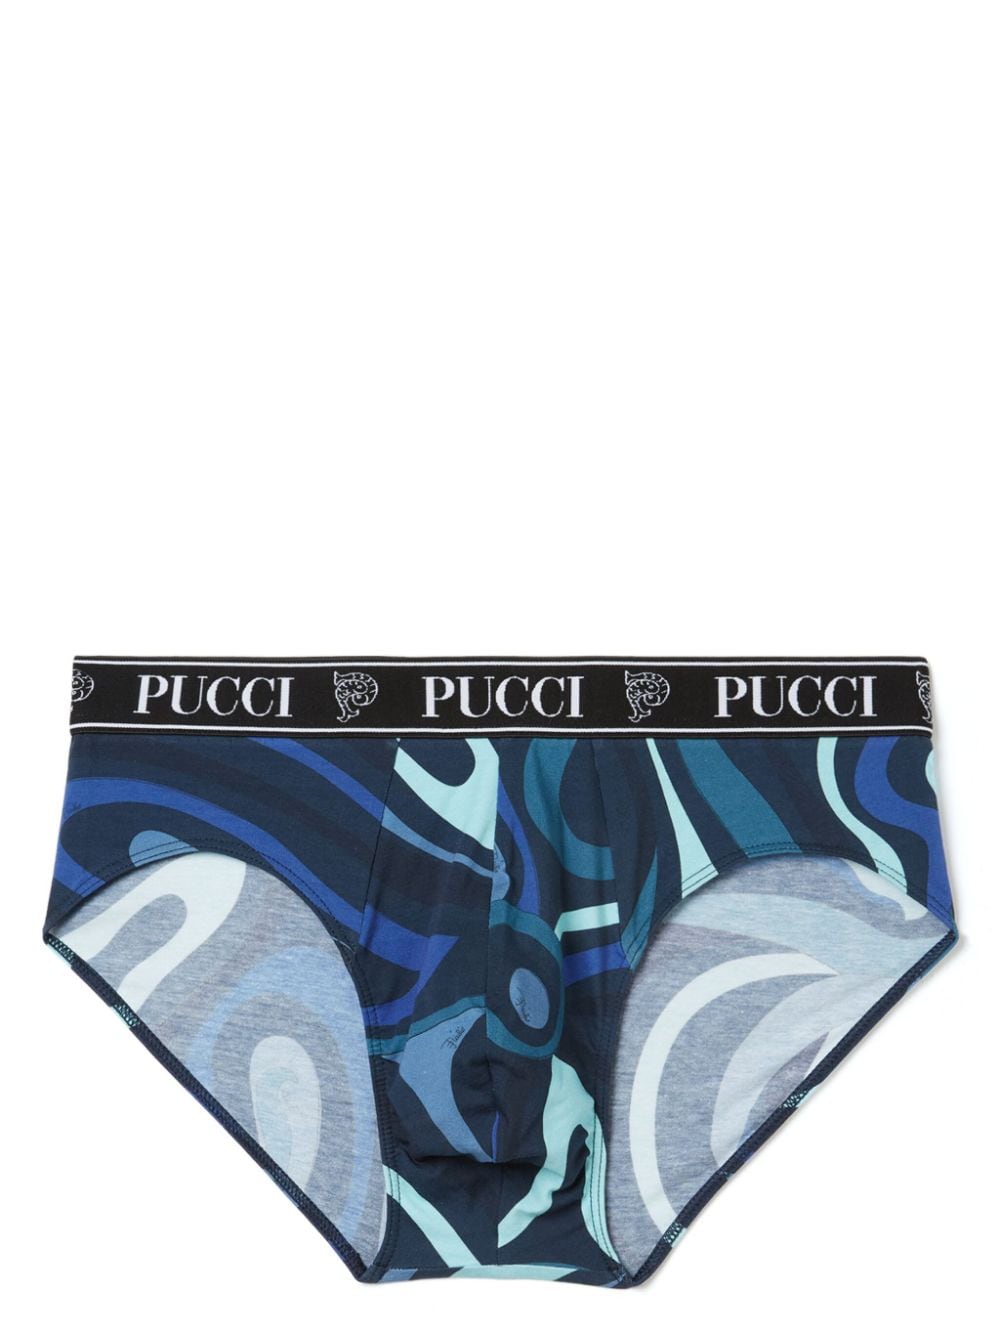 PUCCI Drie slips met logoband Wit